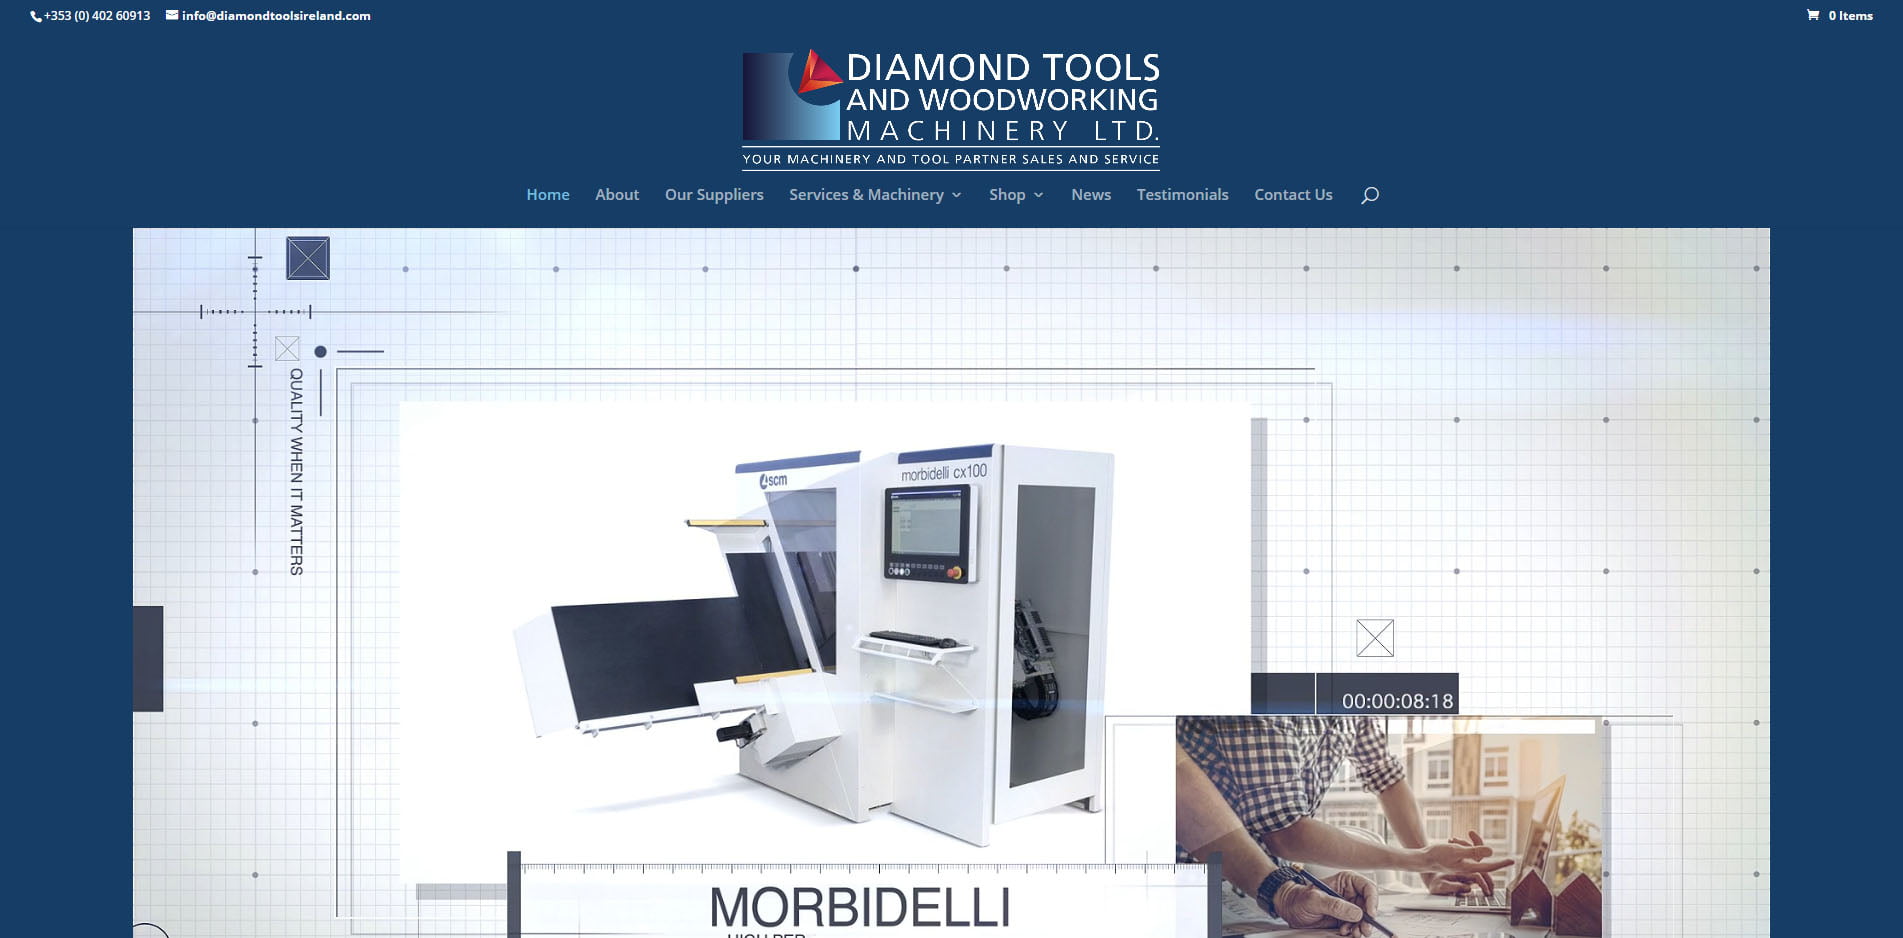 Diamond Tools and Woodworking